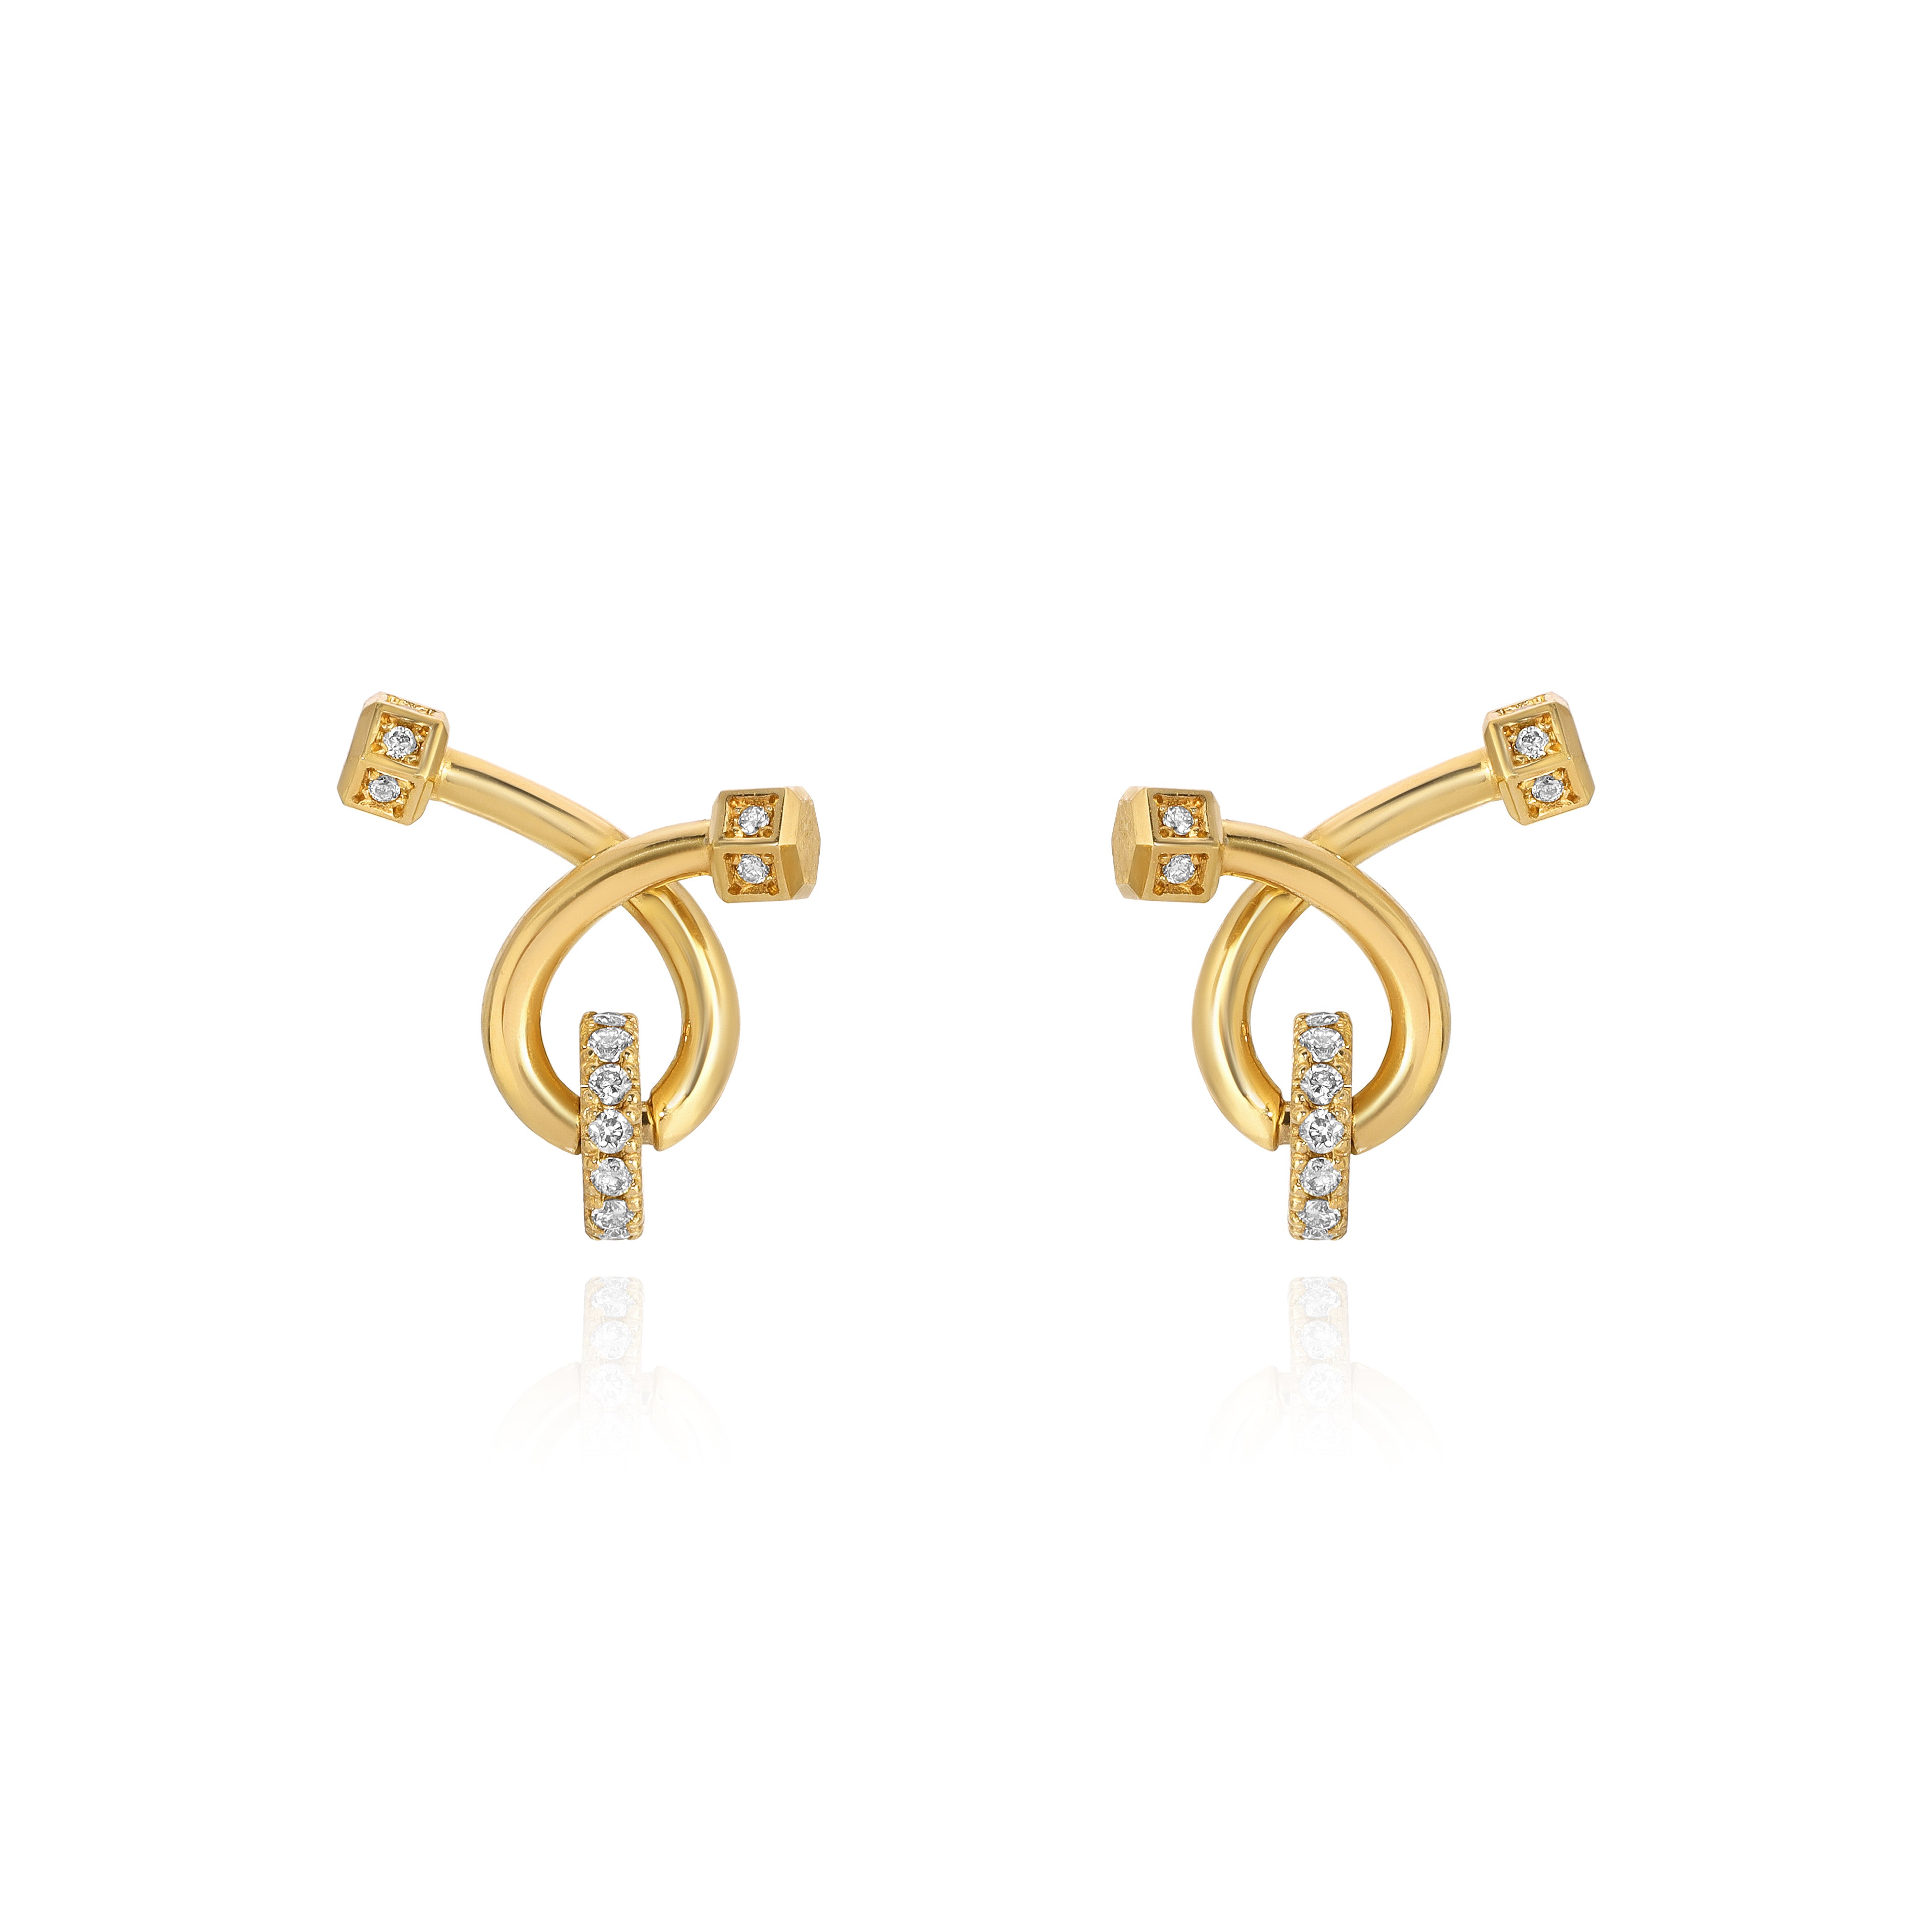 Yellow Gold loop shaped Earrings with Diamond encrusted ends and disc, Small